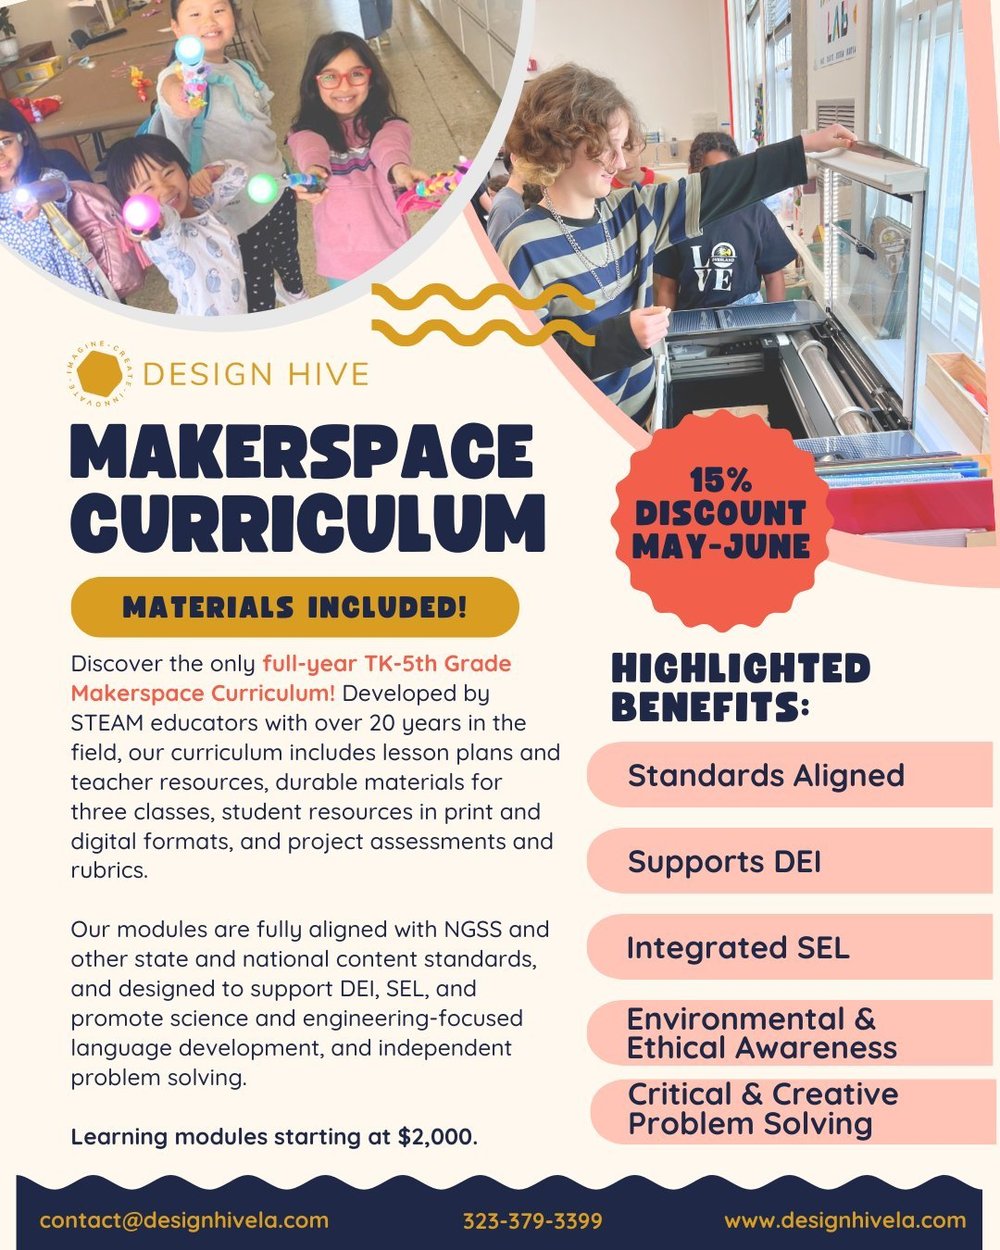 ATTENTION SCHOOLS, HOMESCHOOLERS, AFTERSCHOOL PROGRAMS &amp; ORGANIZATIONS! DESIGN HIVE'S MAKERSPACE CURRICULUM IS HERE!⁠
Discover the only full-year TK-5th Grade Makerspace Curriculum! Developed by  STEAM educators with over 20 years in the field, o